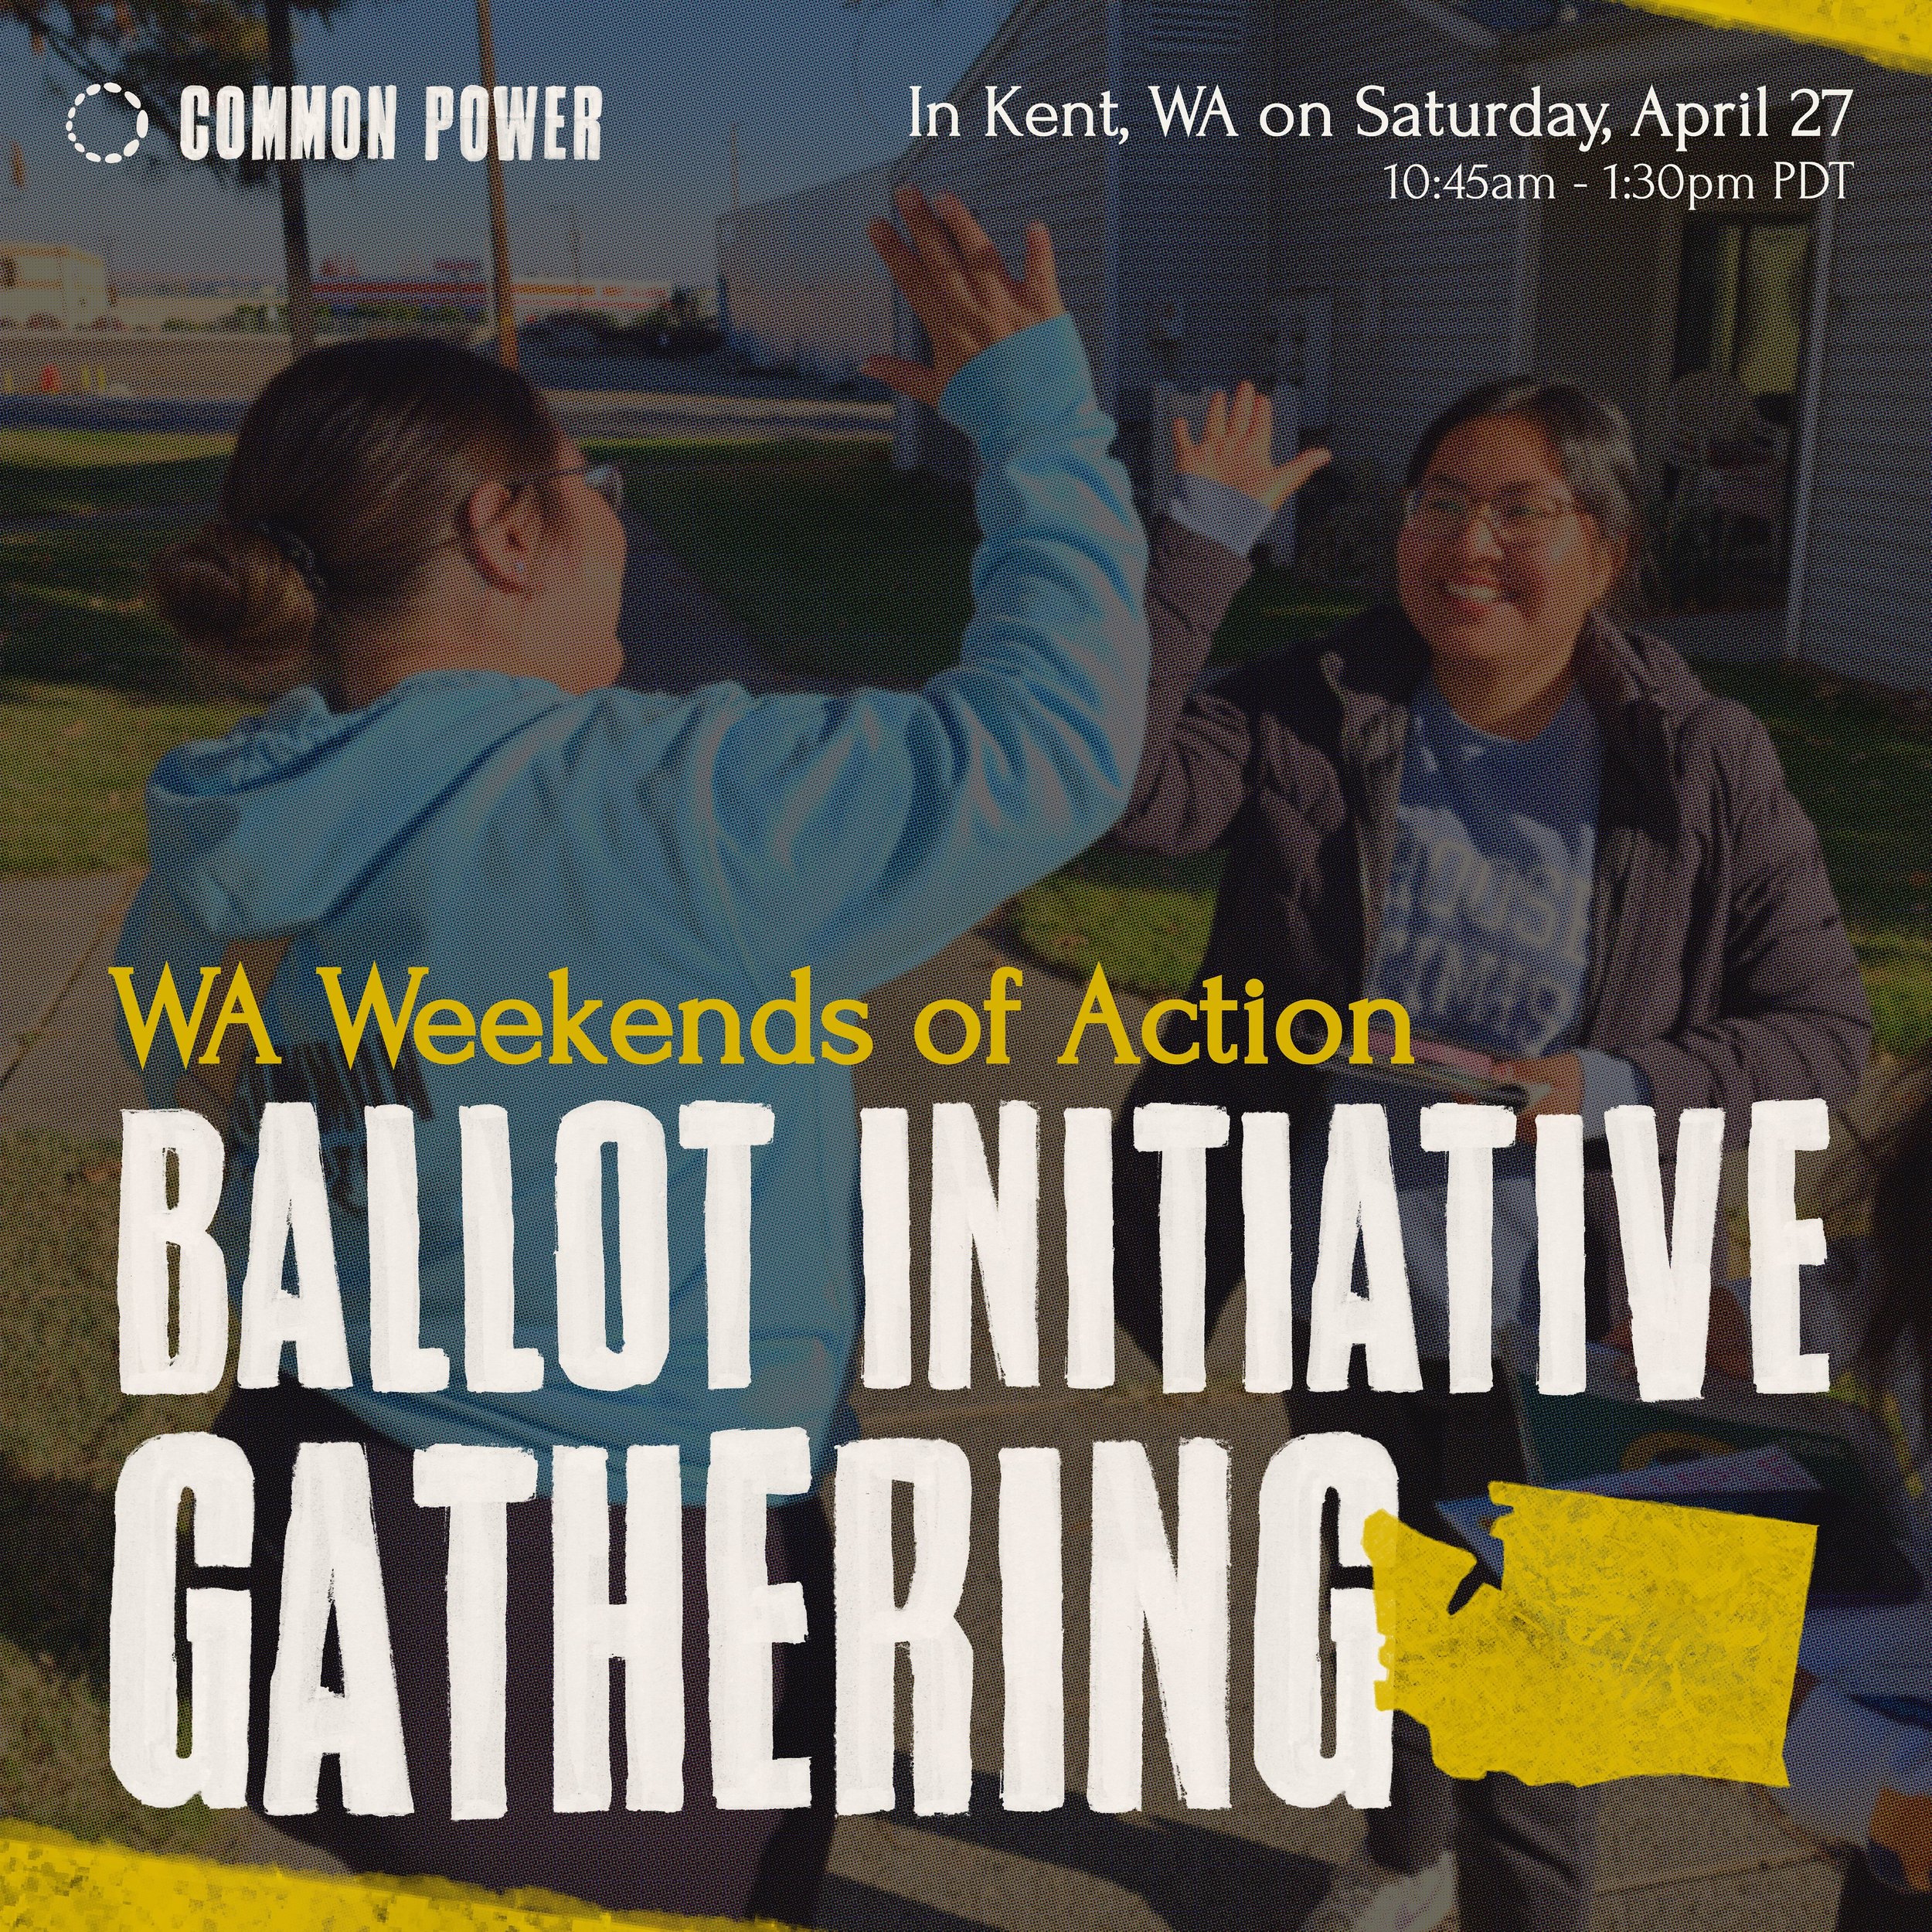 If you&rsquo;ve been waiting for some local WA action, we&rsquo;re starting off strong in Kent! 📋✍️

@kentfordistricts is hosting a ballot initiative petition effort to change the at-large elections to district-based races that can create a fair cha